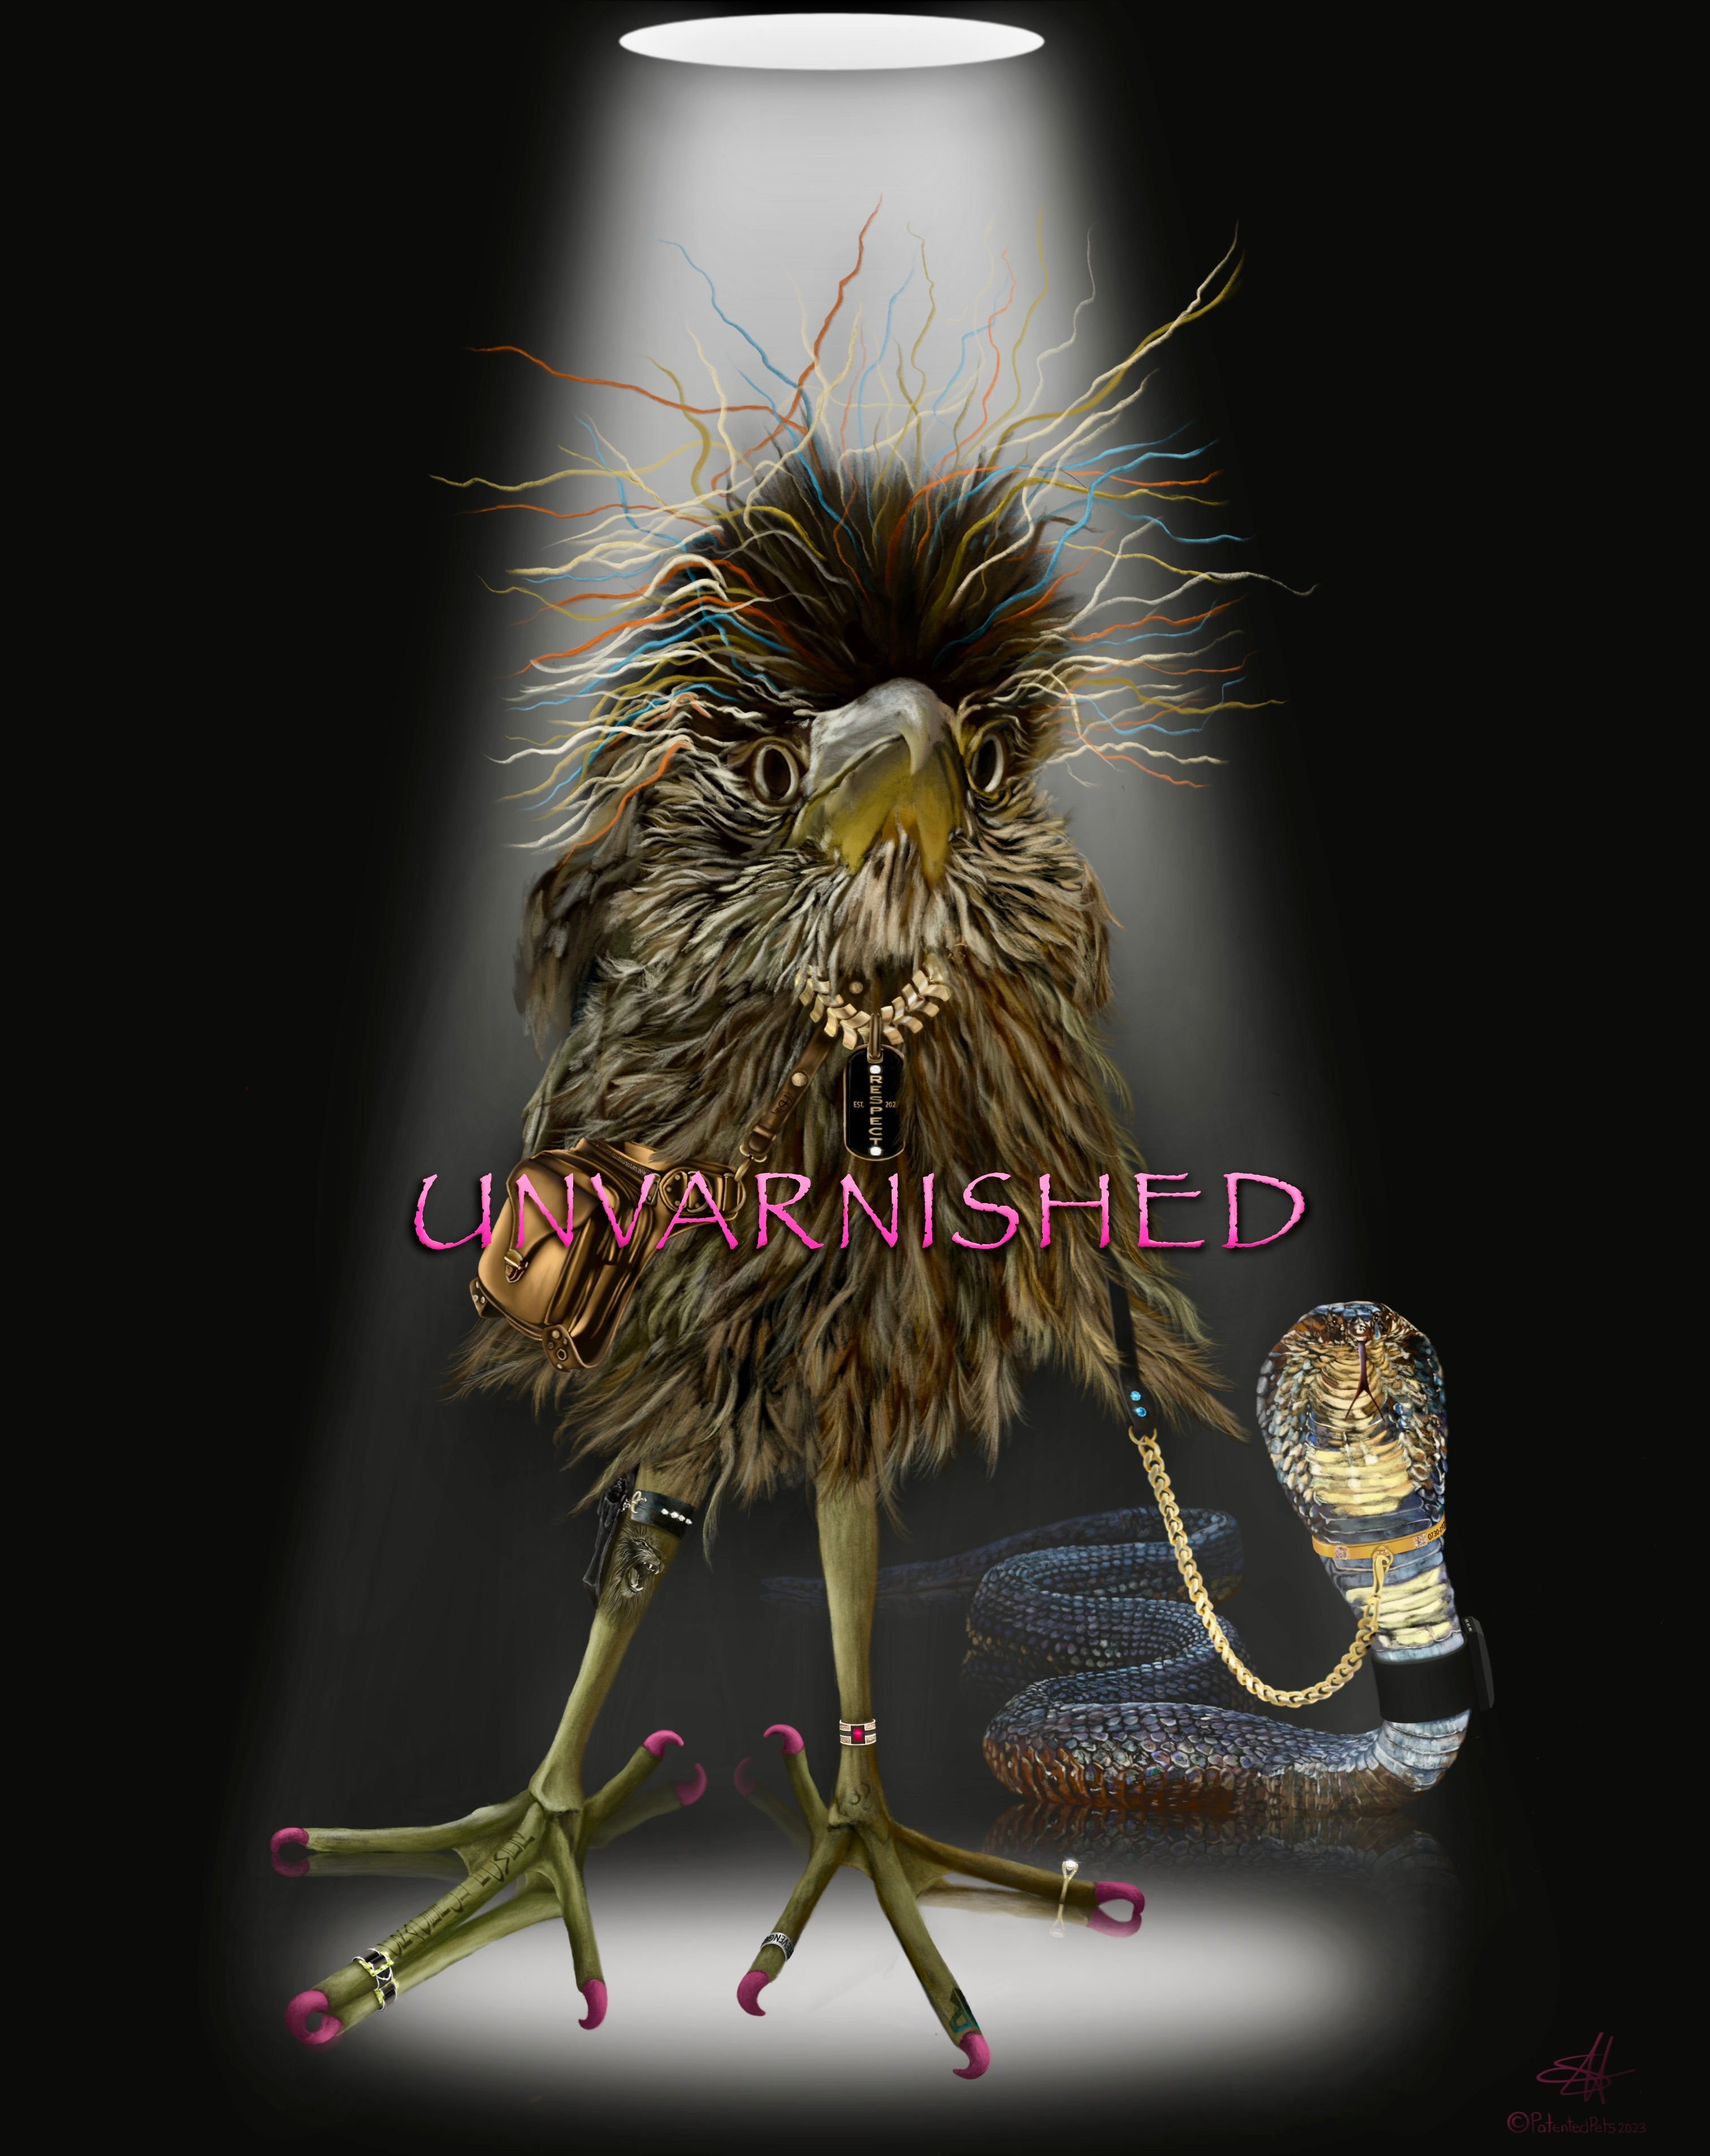 A hand-drawn digital illustration depicts a bird with vibrant squiggles atop its head, resembling colorful hair. Despite injuries, the bird clutches a gold leash attached to a cobra snake, adorned with a prisoner-like choker and monitoring device. The bird's legs boast tattoos, including a roaring lion, and a knife leg strap, while its brightly painted claws don compelling rings. Completing the ensemble, a leather shoulder bag spans the bird's body. The dimly lit stage with a single spotlight upon bird.